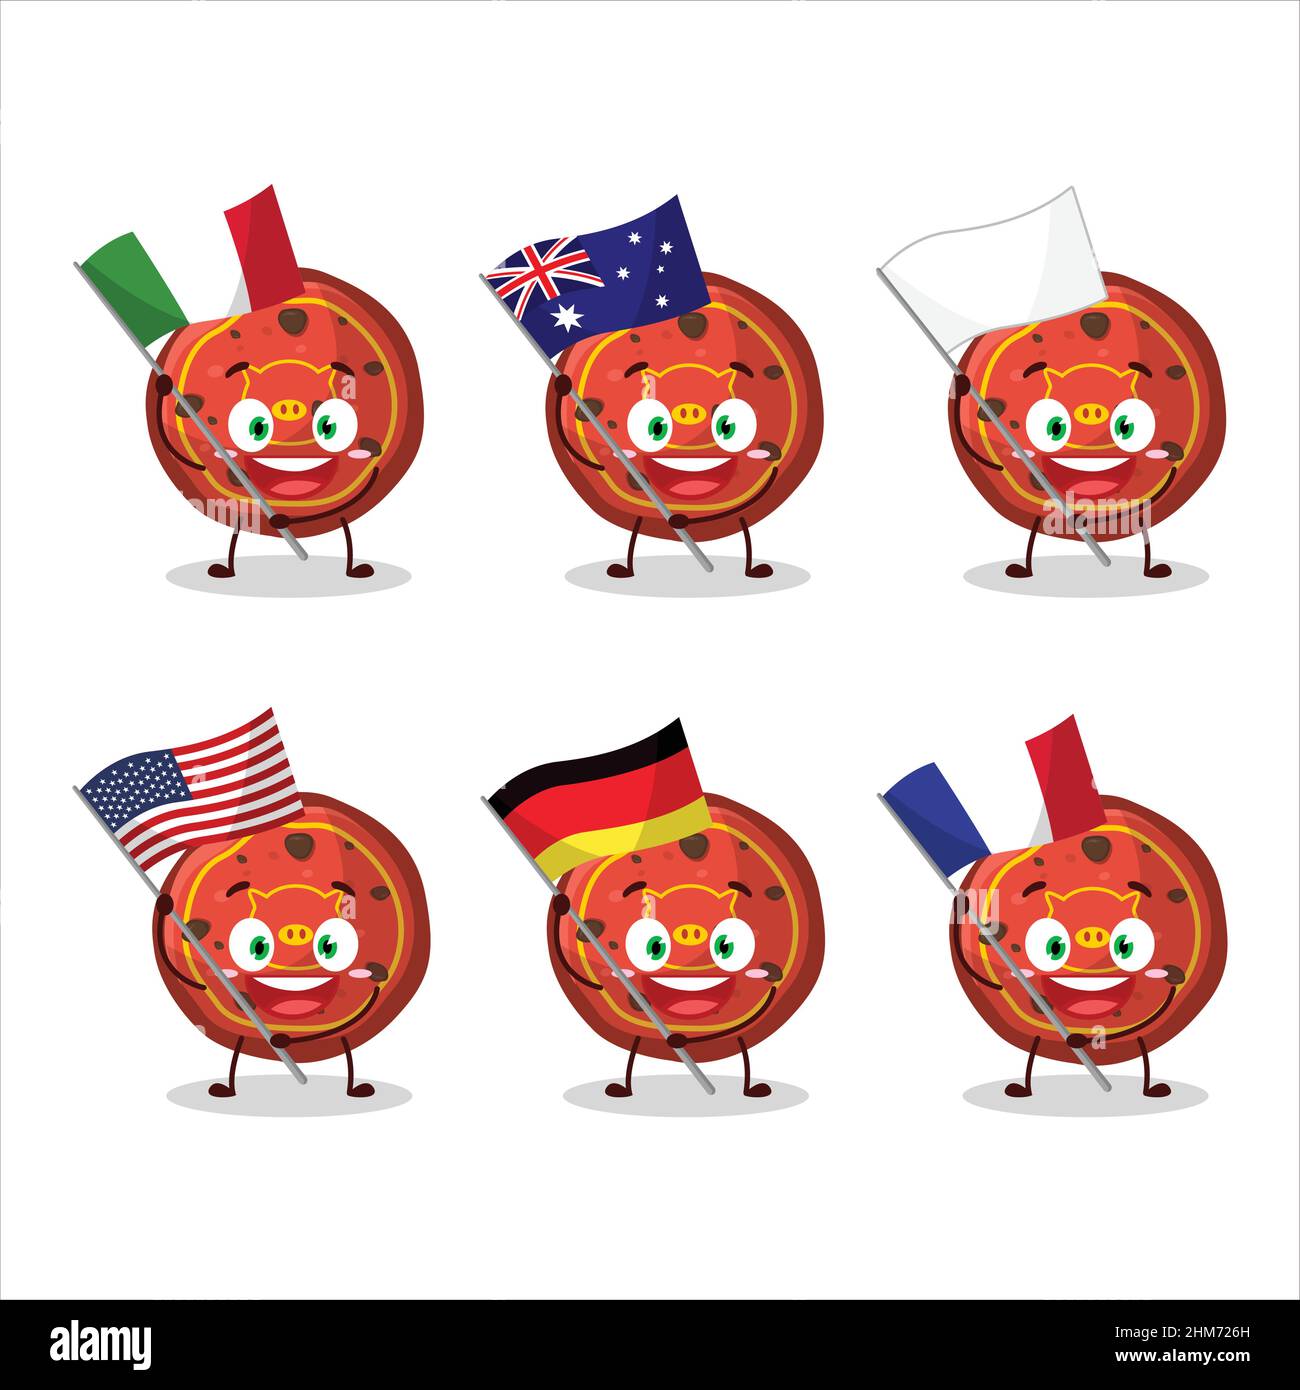 red cookies pig cartoon character bring the flags of various countries. Vector illustration Stock Vector